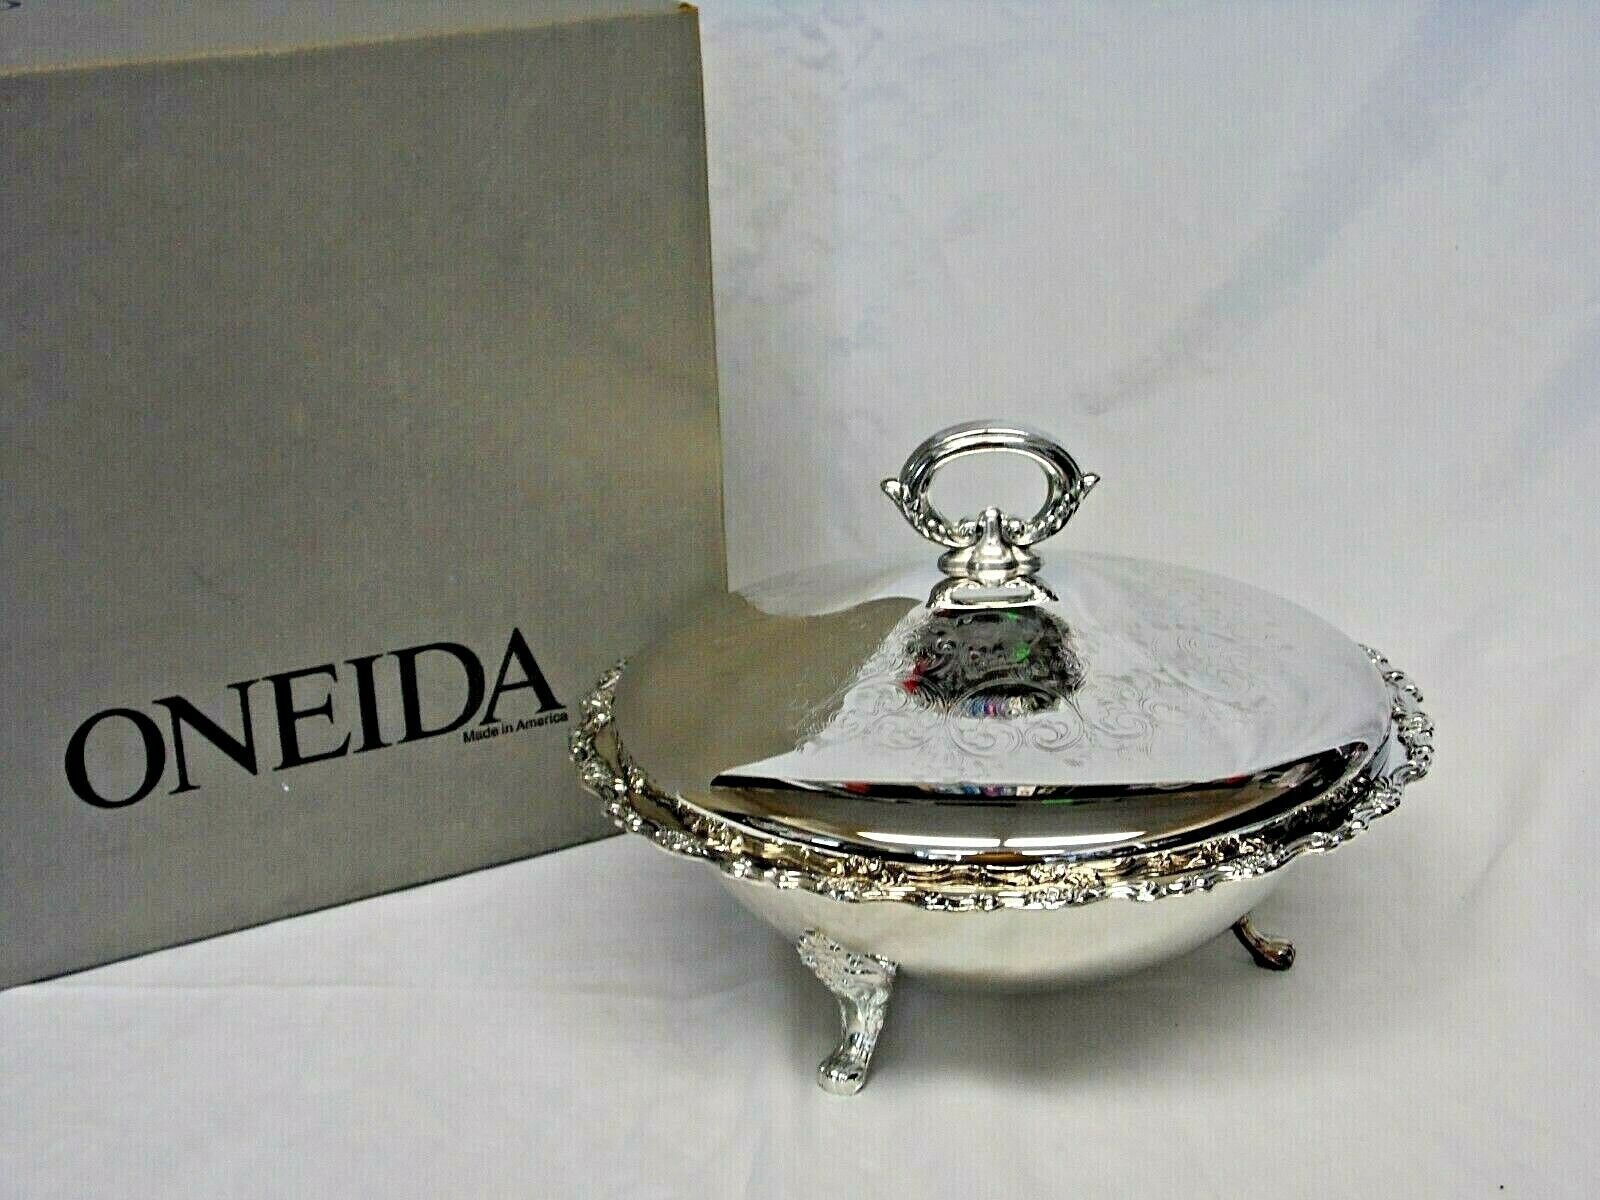 Oneida ROYAL PROVINCIAL 1.5q Footed Covered Casserole with Pyrex Glass Liner